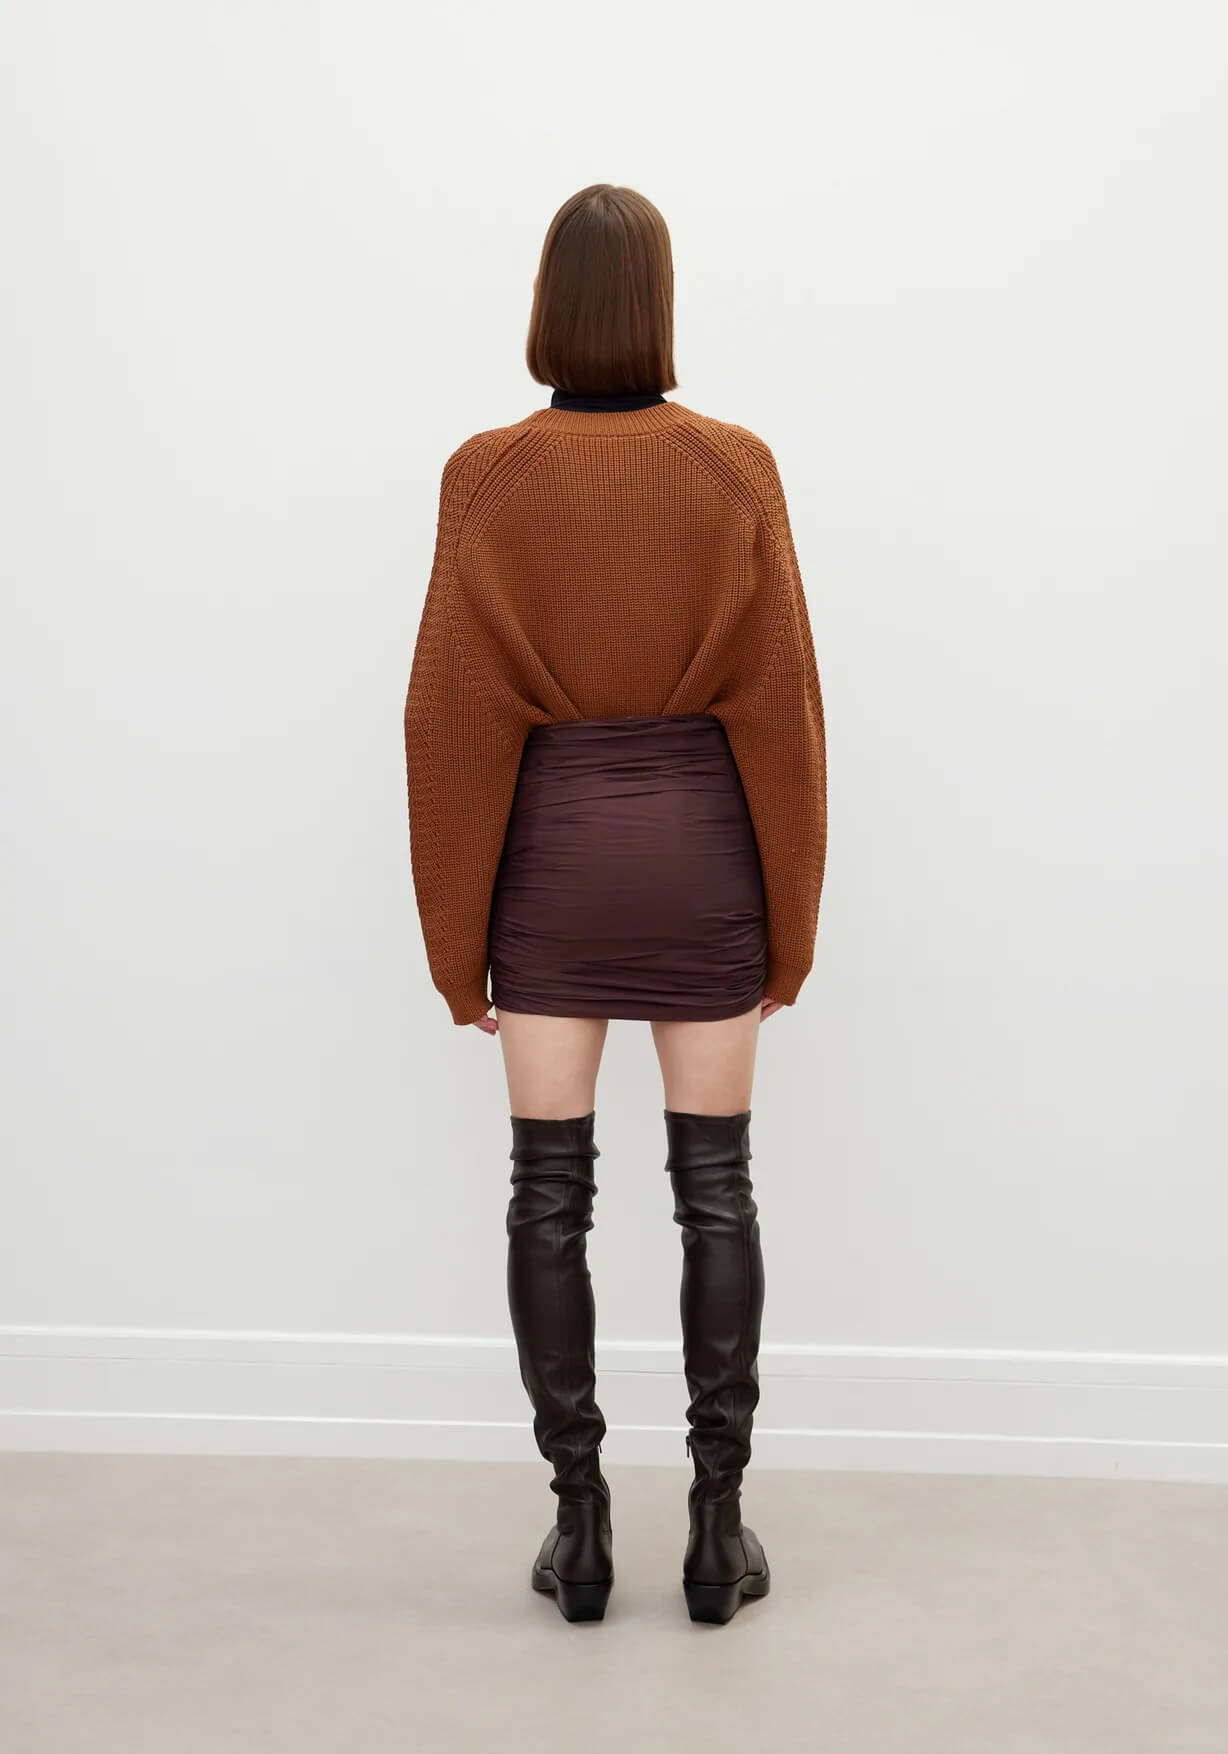 ROHE Denia Mini Skirt in Chocolate Brown from The New Trend